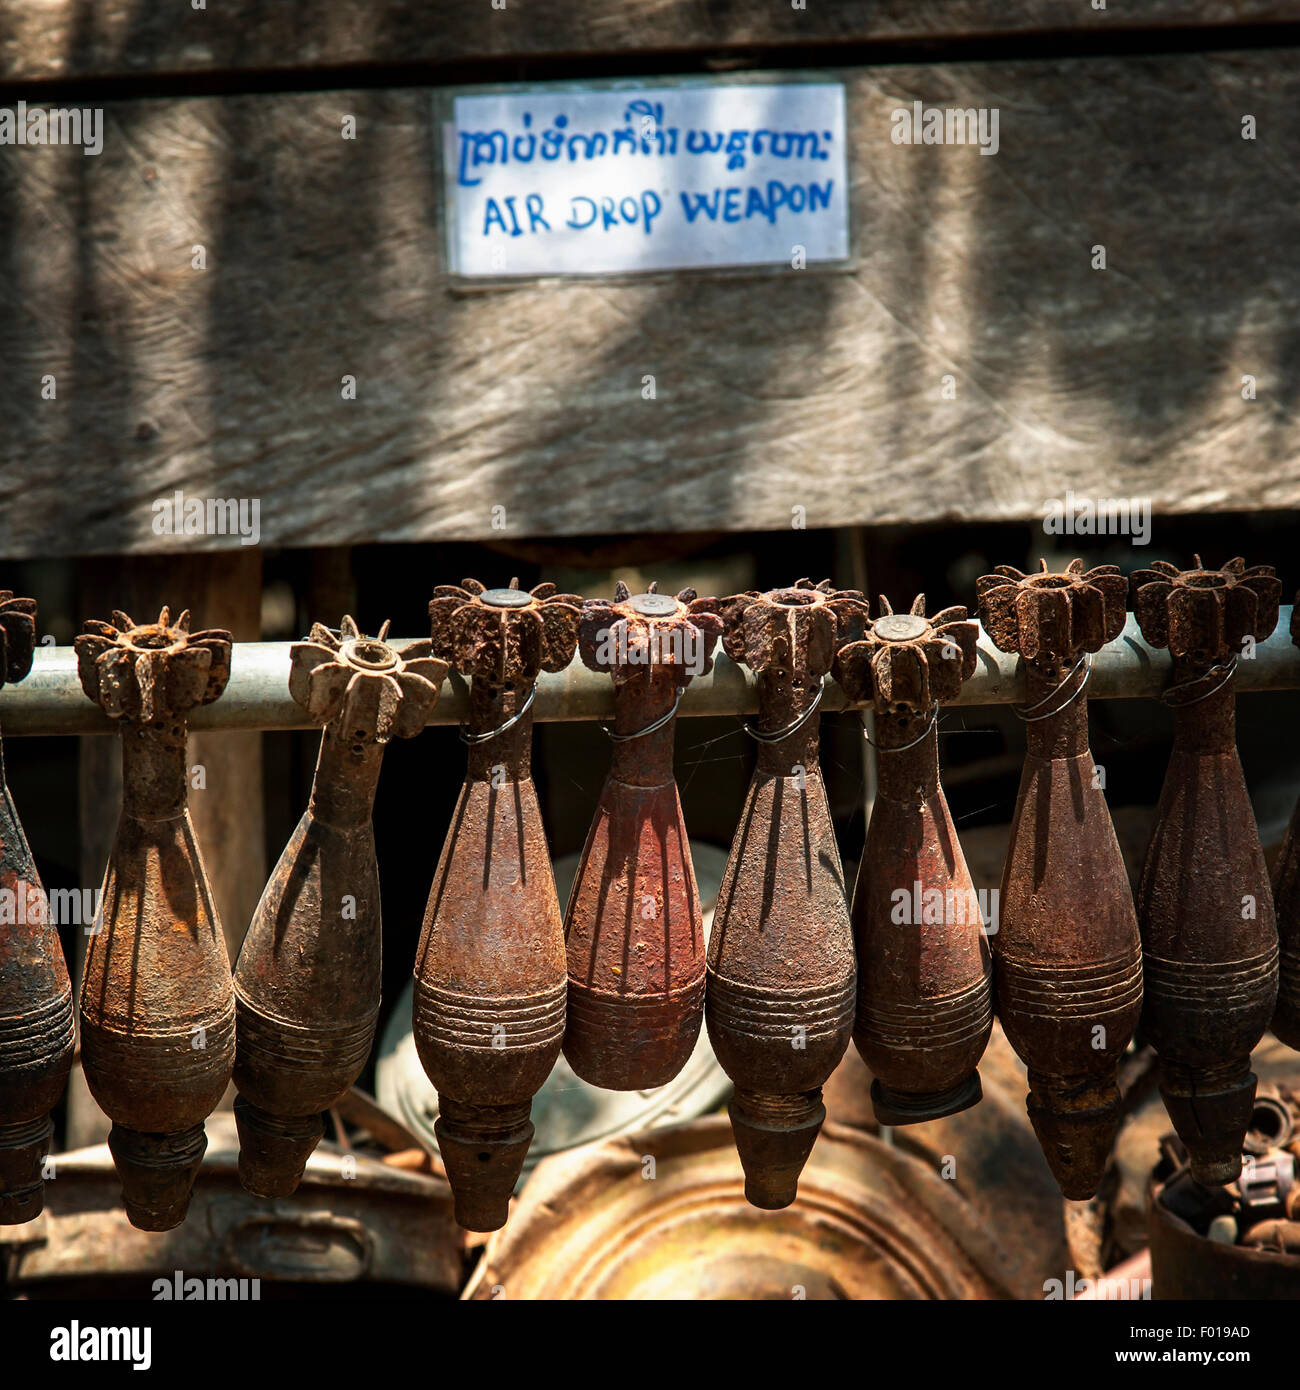 Display of air Drop weapons from the Land Mine Museum in Siem Reap, Cambodia Stock Photo